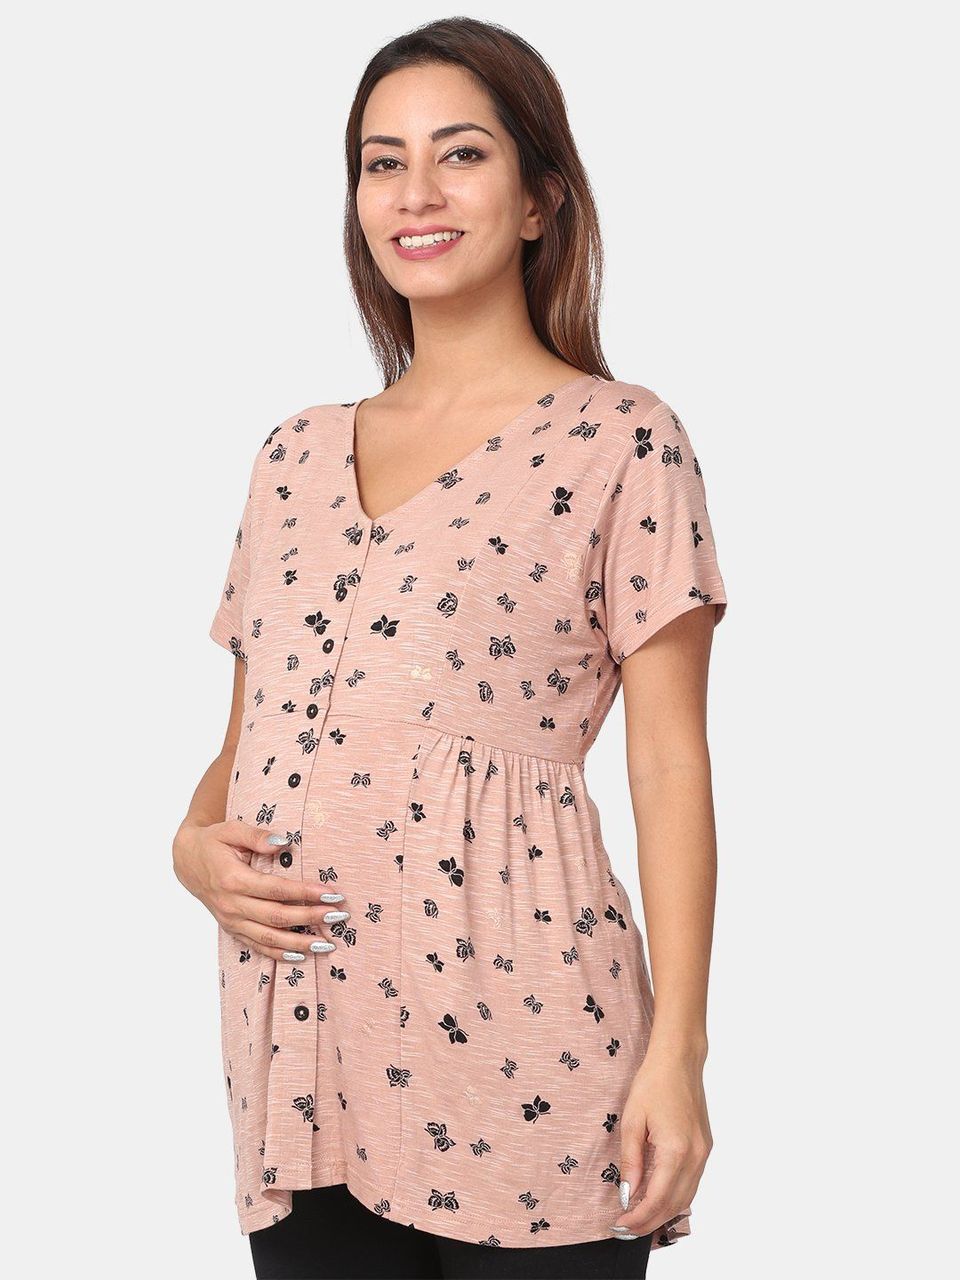 The Mom Store Butterfly Maternity and Nursing Top